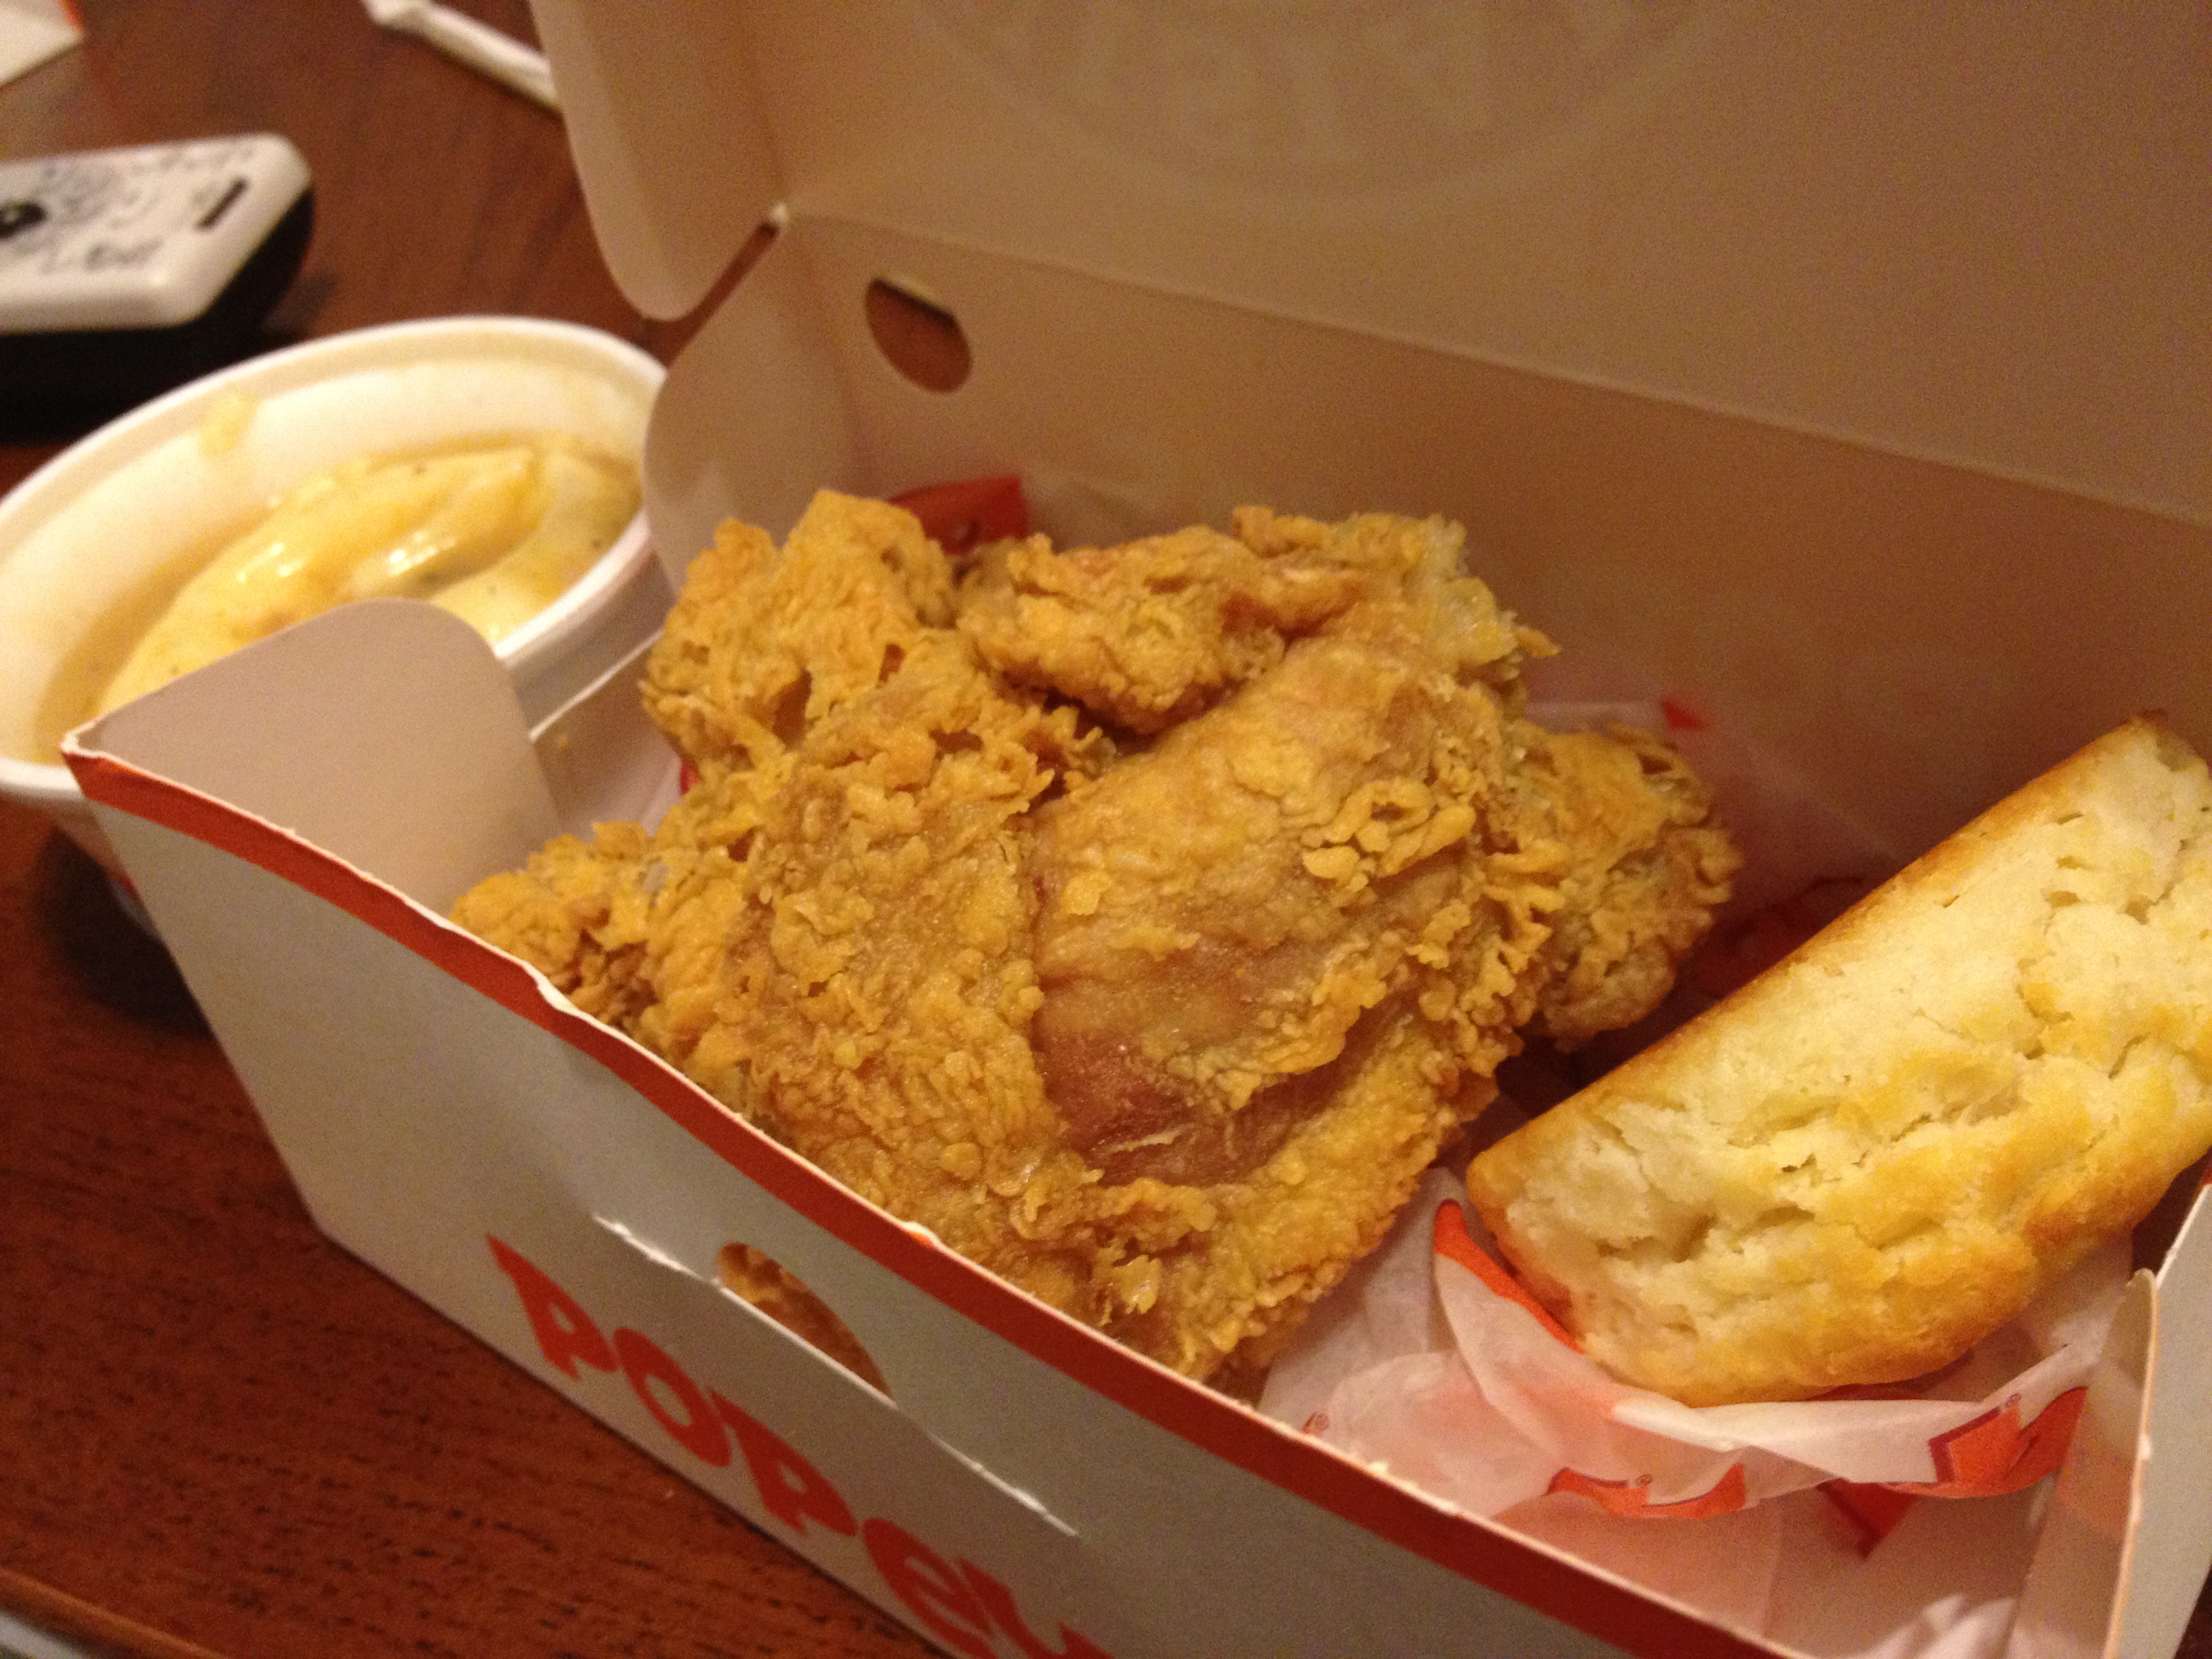 Popeyes Tuesday Special